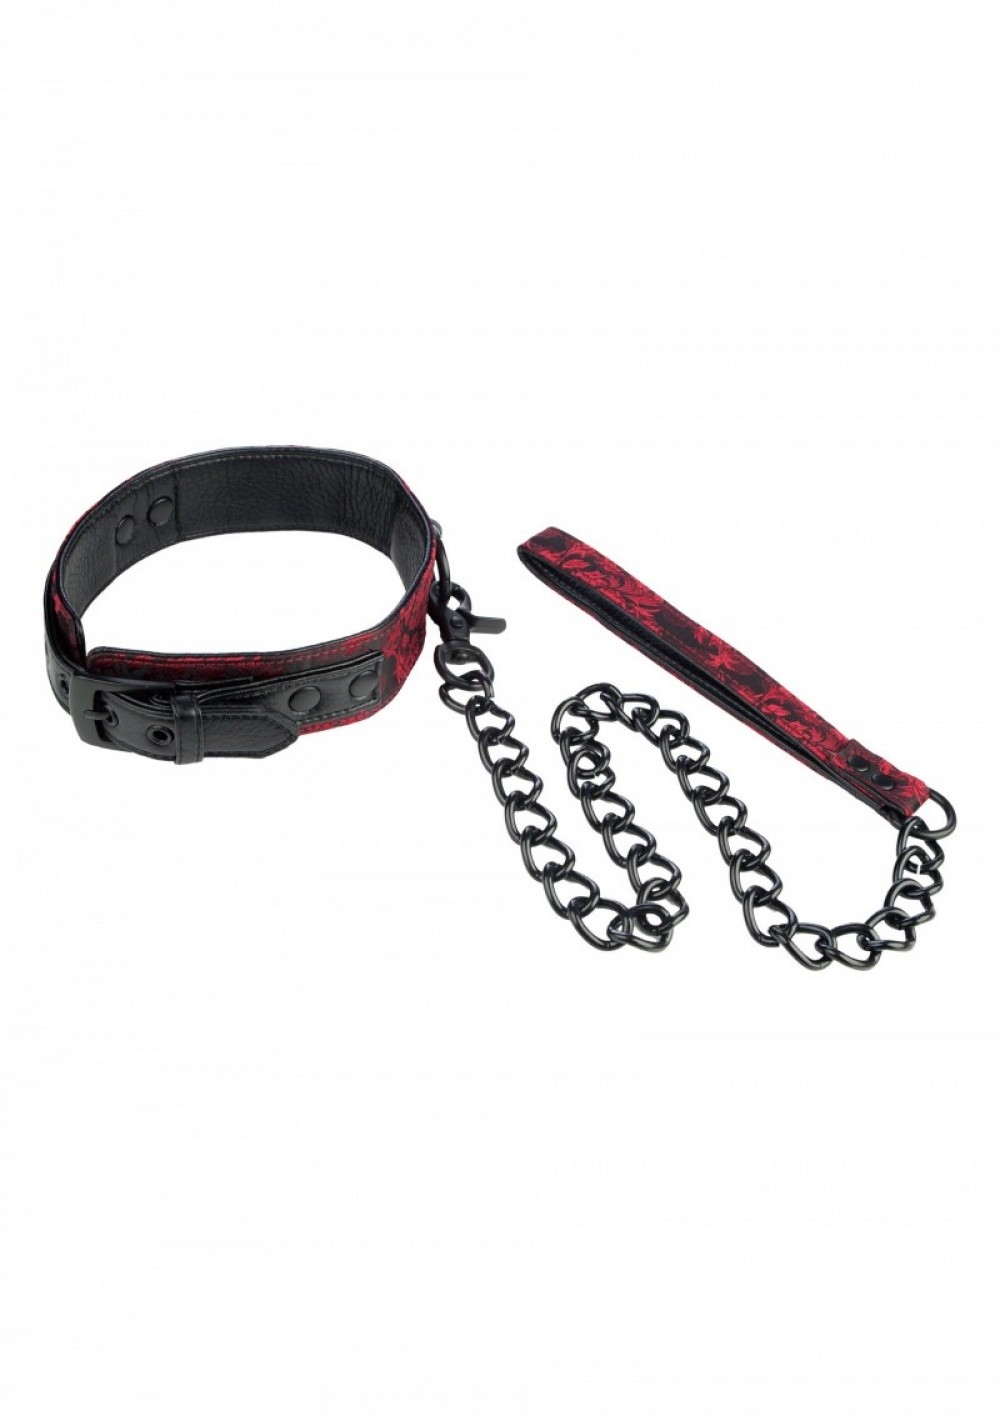 candal Collier & laisse Scandal Collar with Leash noir & rouge